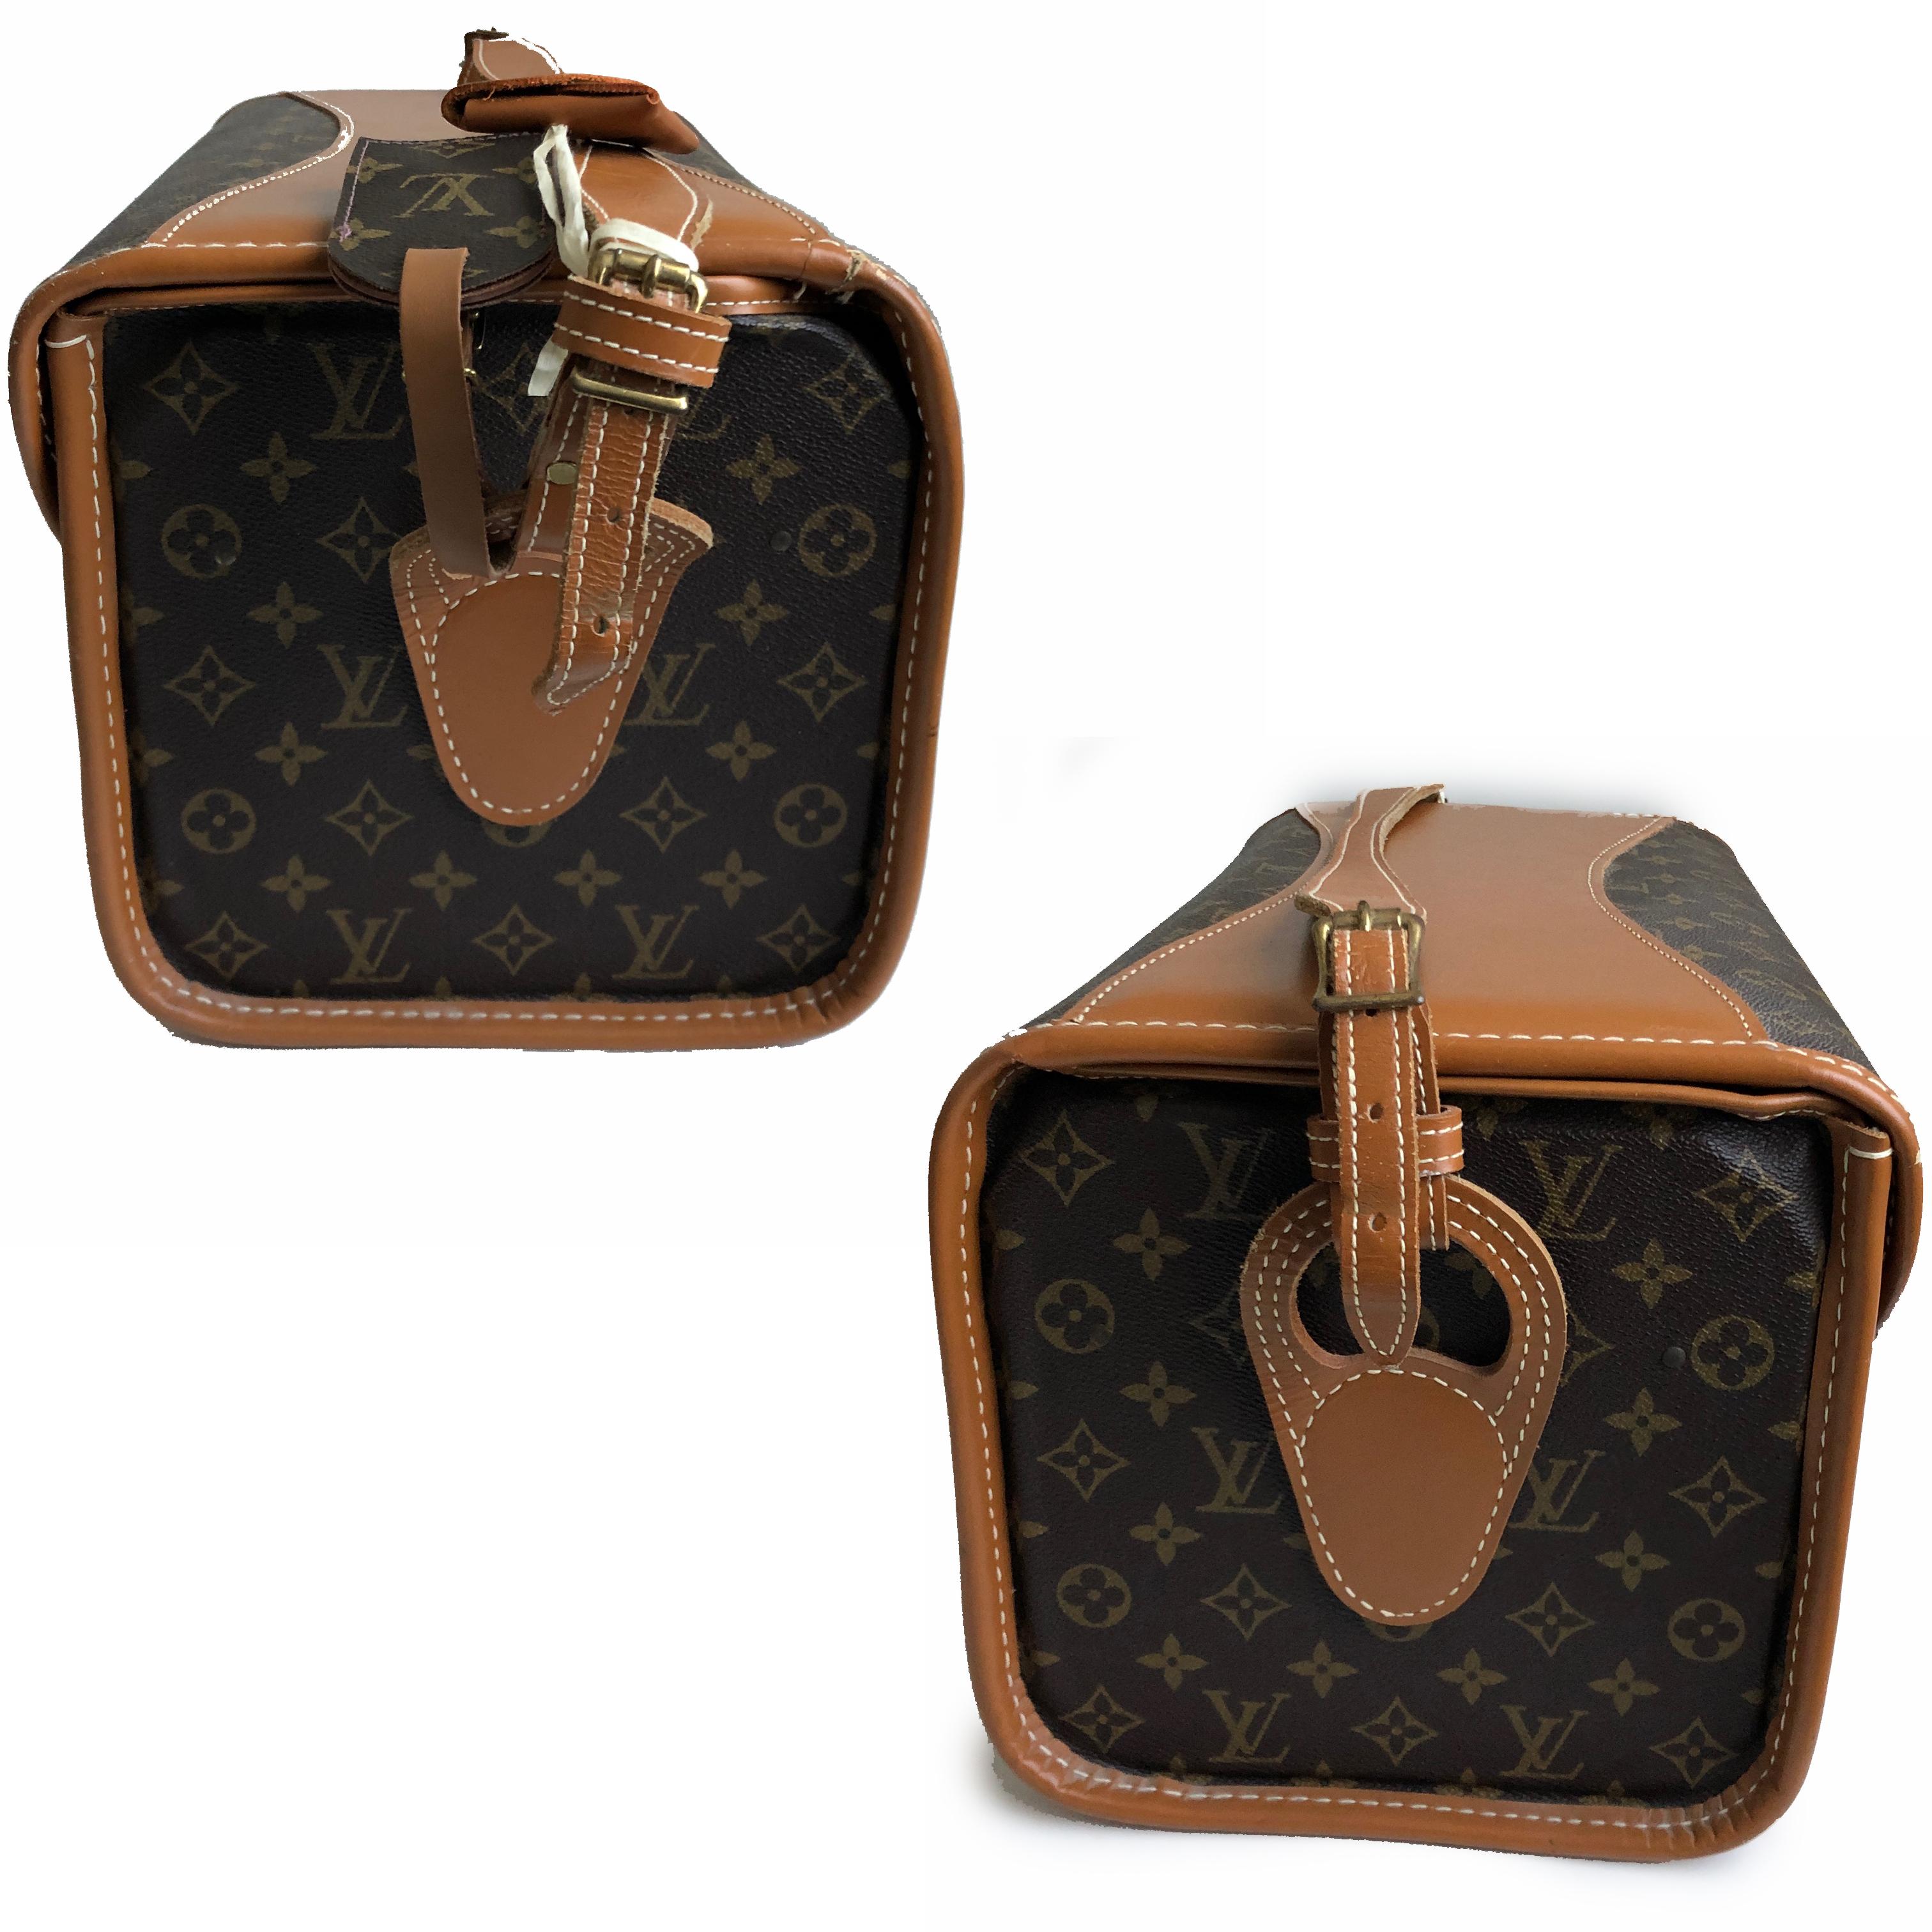 Authentic, preowned, vintage Louis Vuitton x French Company Monogram Train Case Carry On Bag, early 80s. Comes w/mirror, insert tray, keys & leather key keeper and luggage tag (pic 6). Interior covered in clear plastic for easy cleaning.